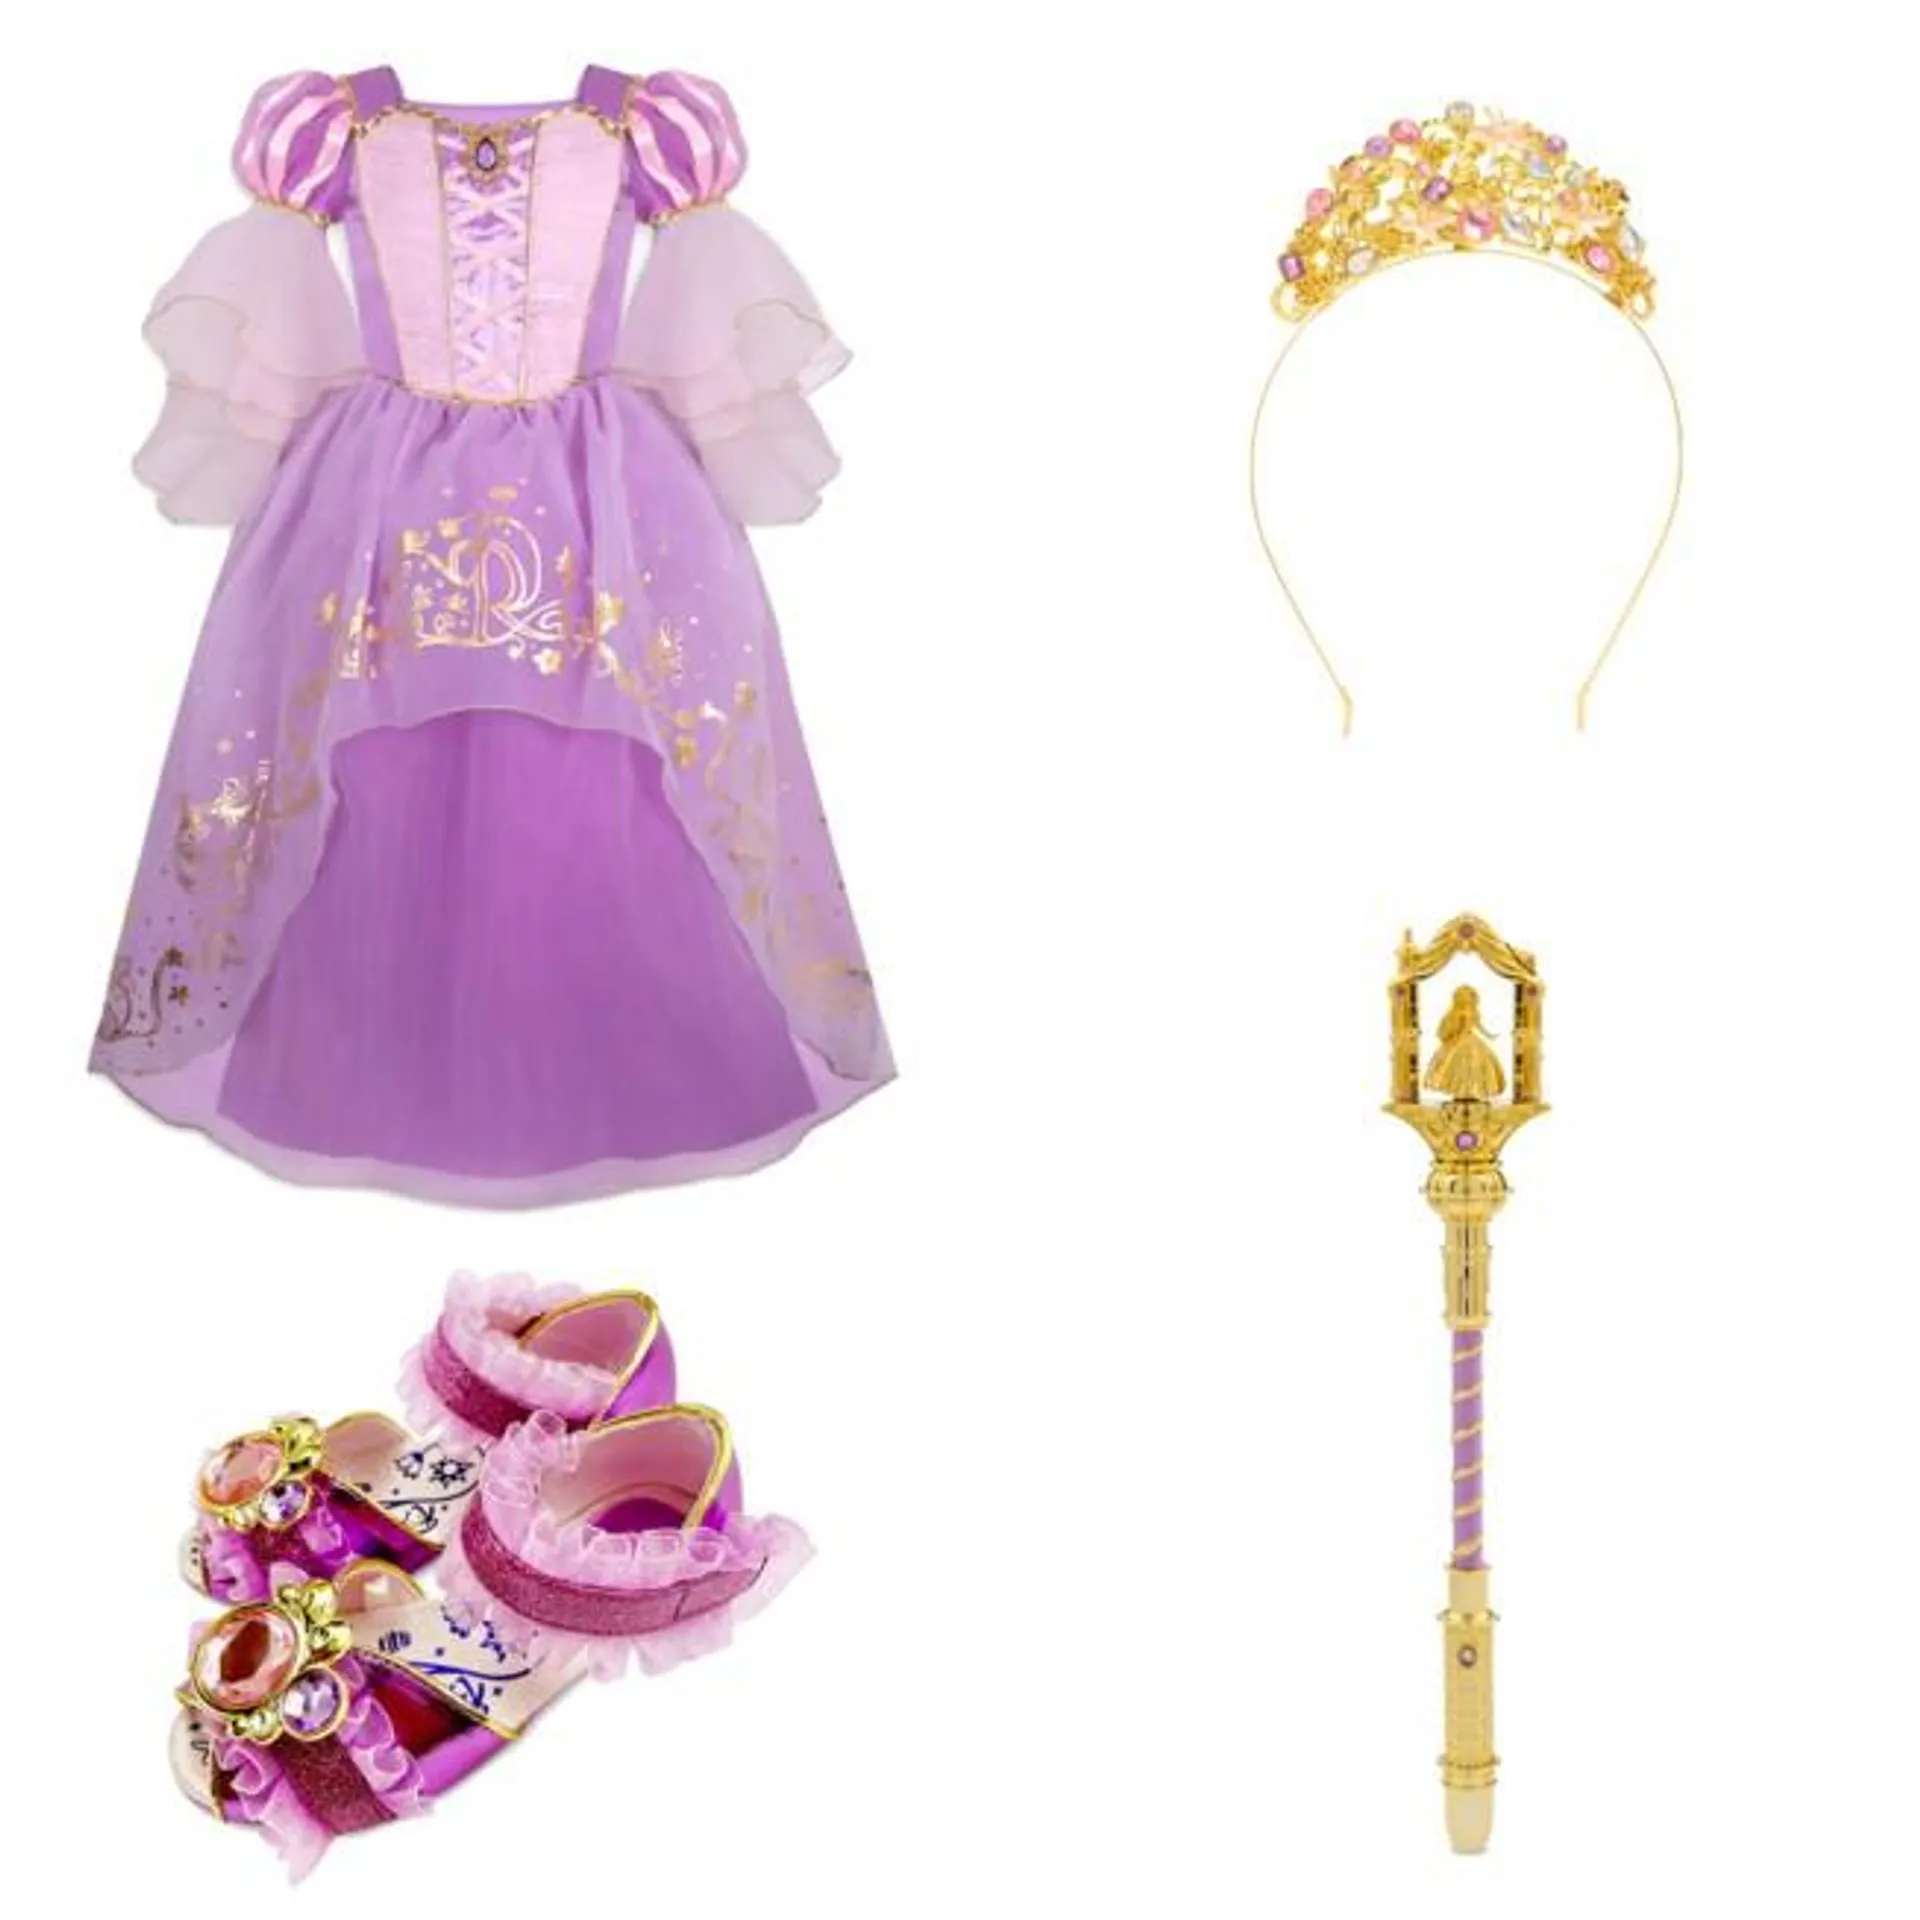 Rapunzel Costume Collection For Kids, Tangled